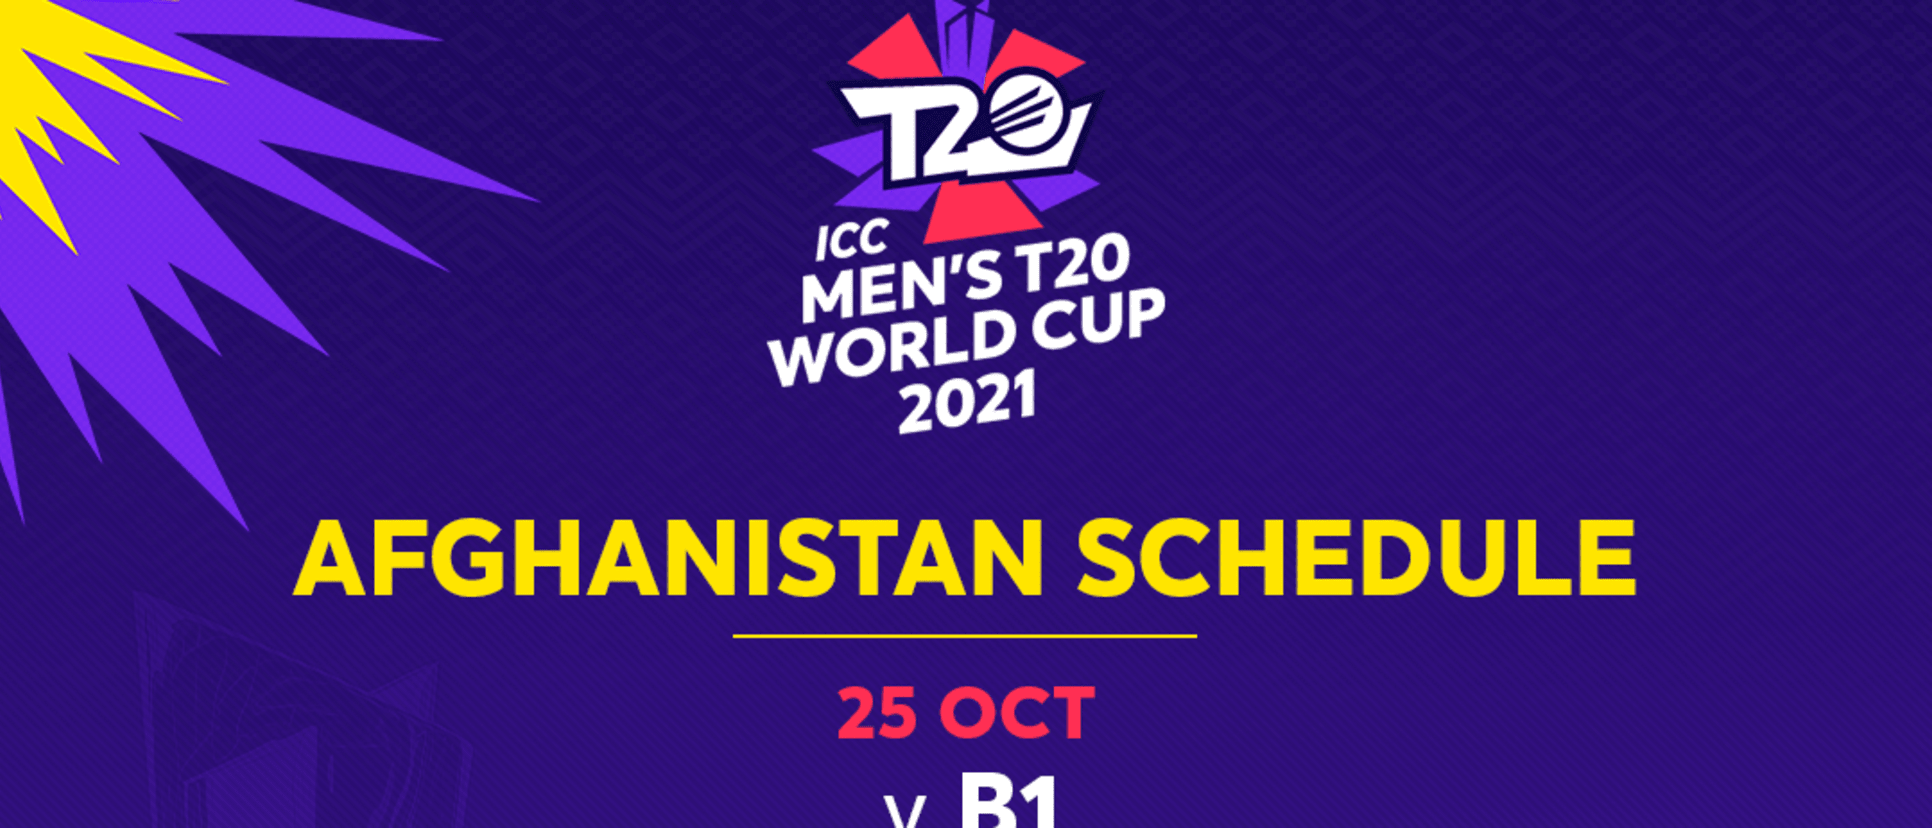 Afghanistsan's T20WC schedule